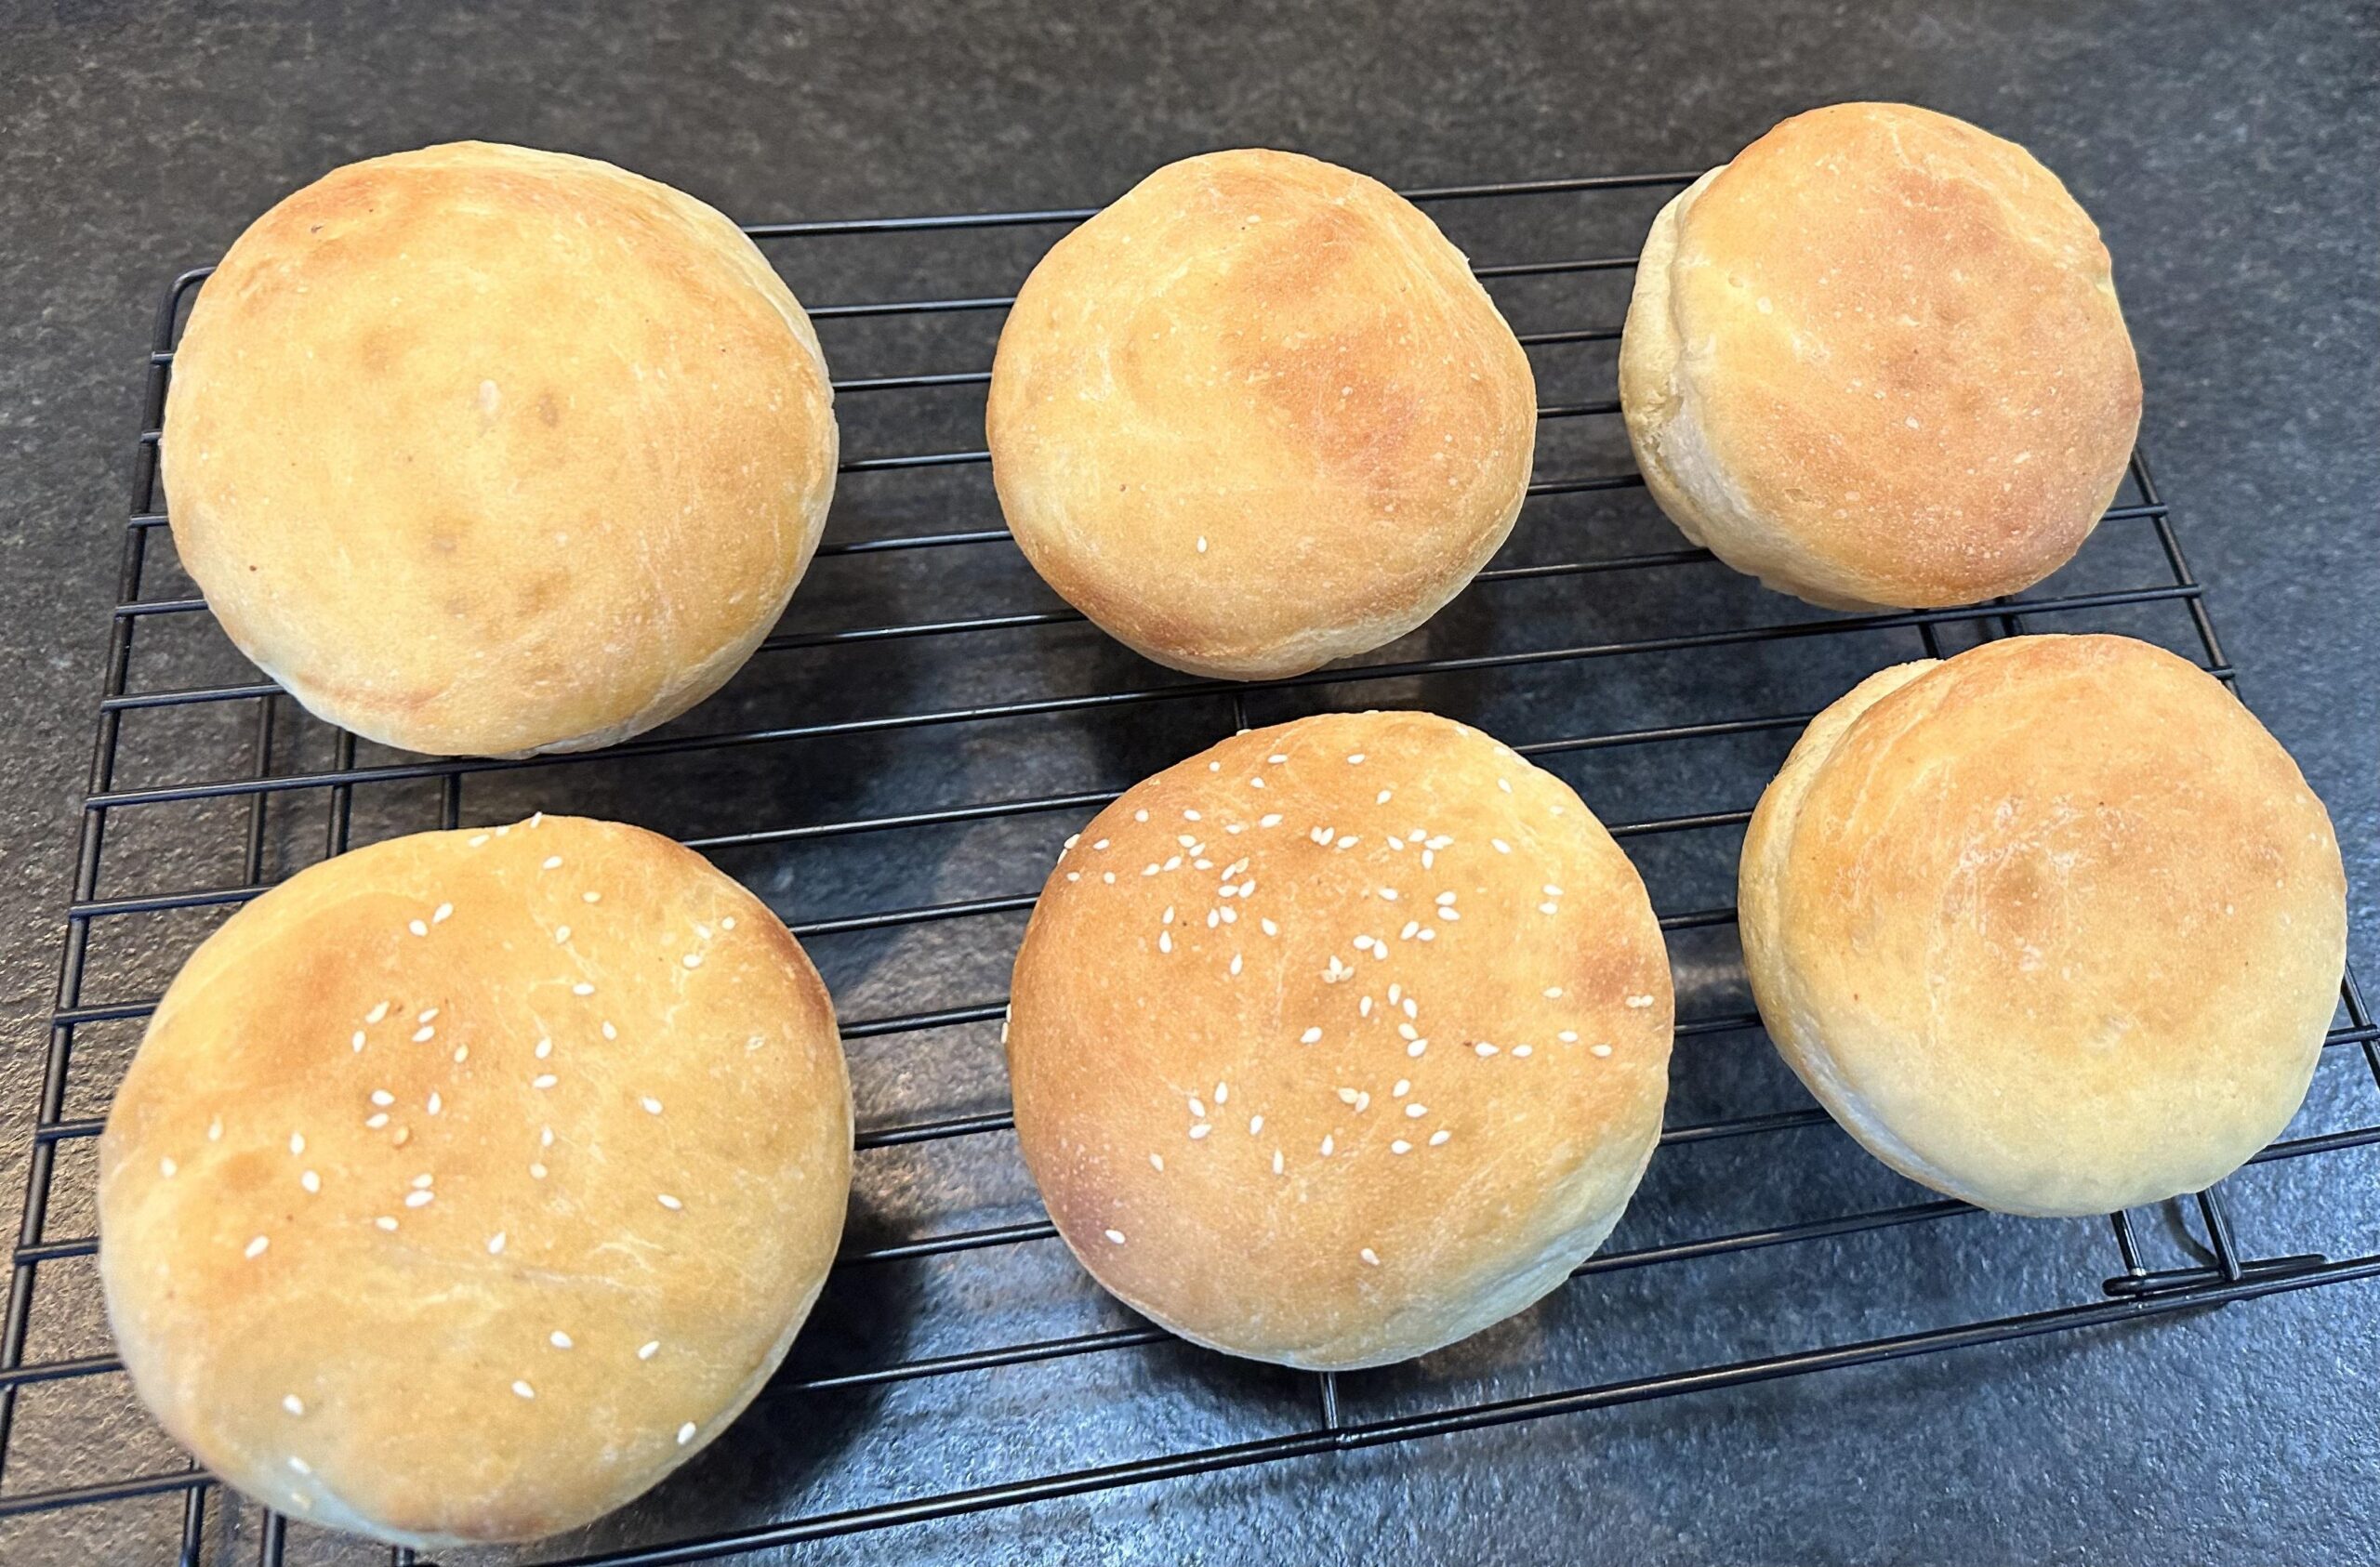  The perfect sandwich starts with the perfect bun, and I've got just the recipe for you.